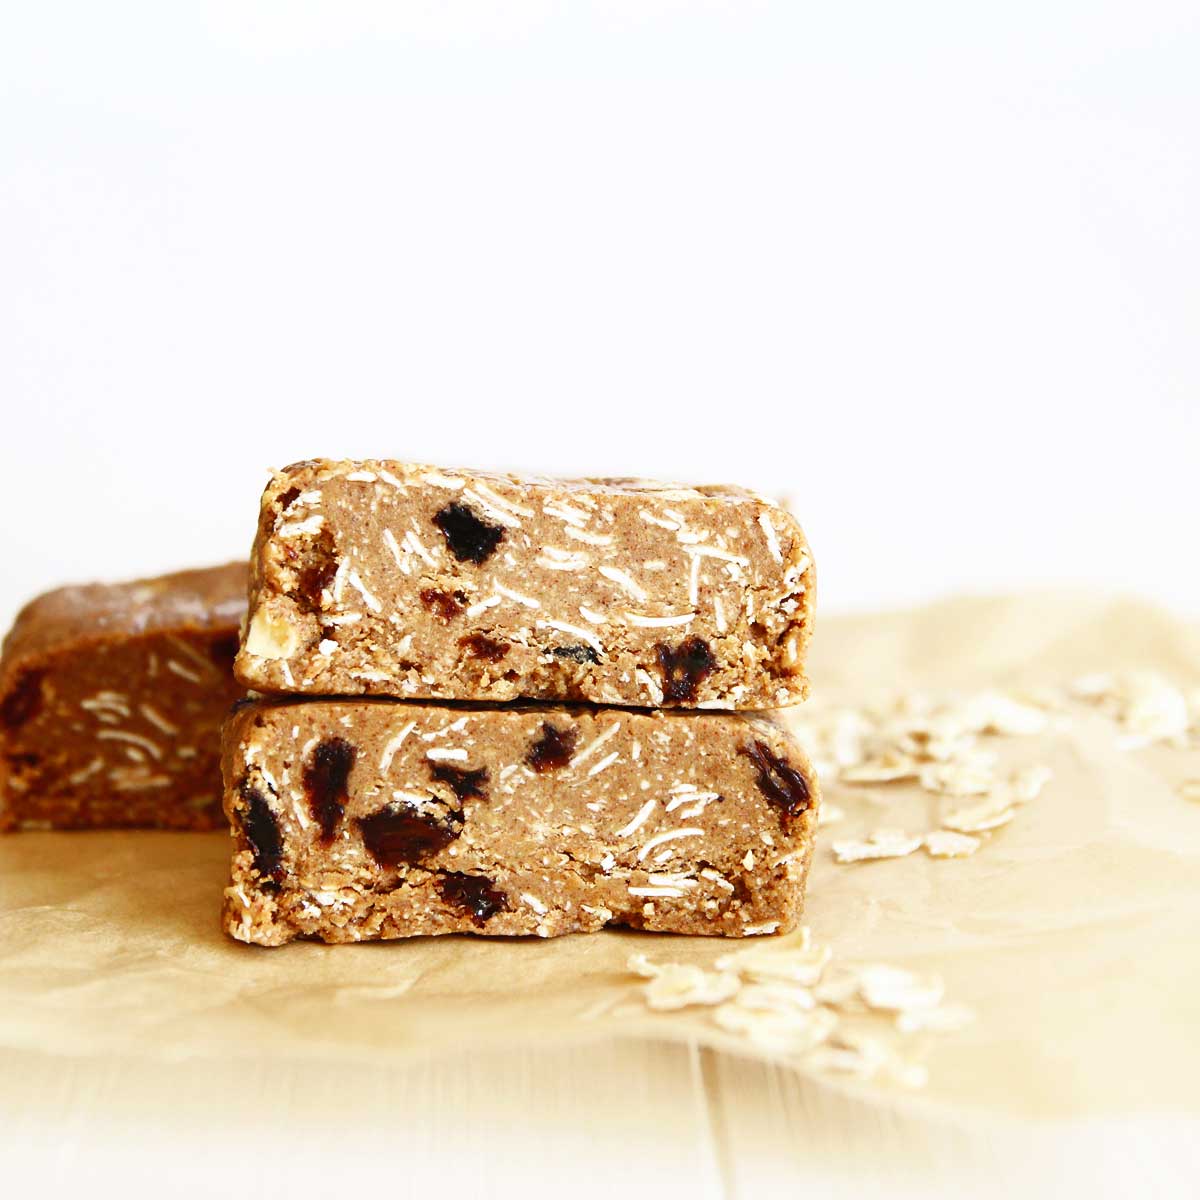 Soft & Chewy Applesauce Oatmeal Cookie Protein Bars (Vegan-Friendly Recipe) - PB Fit Nice Cream